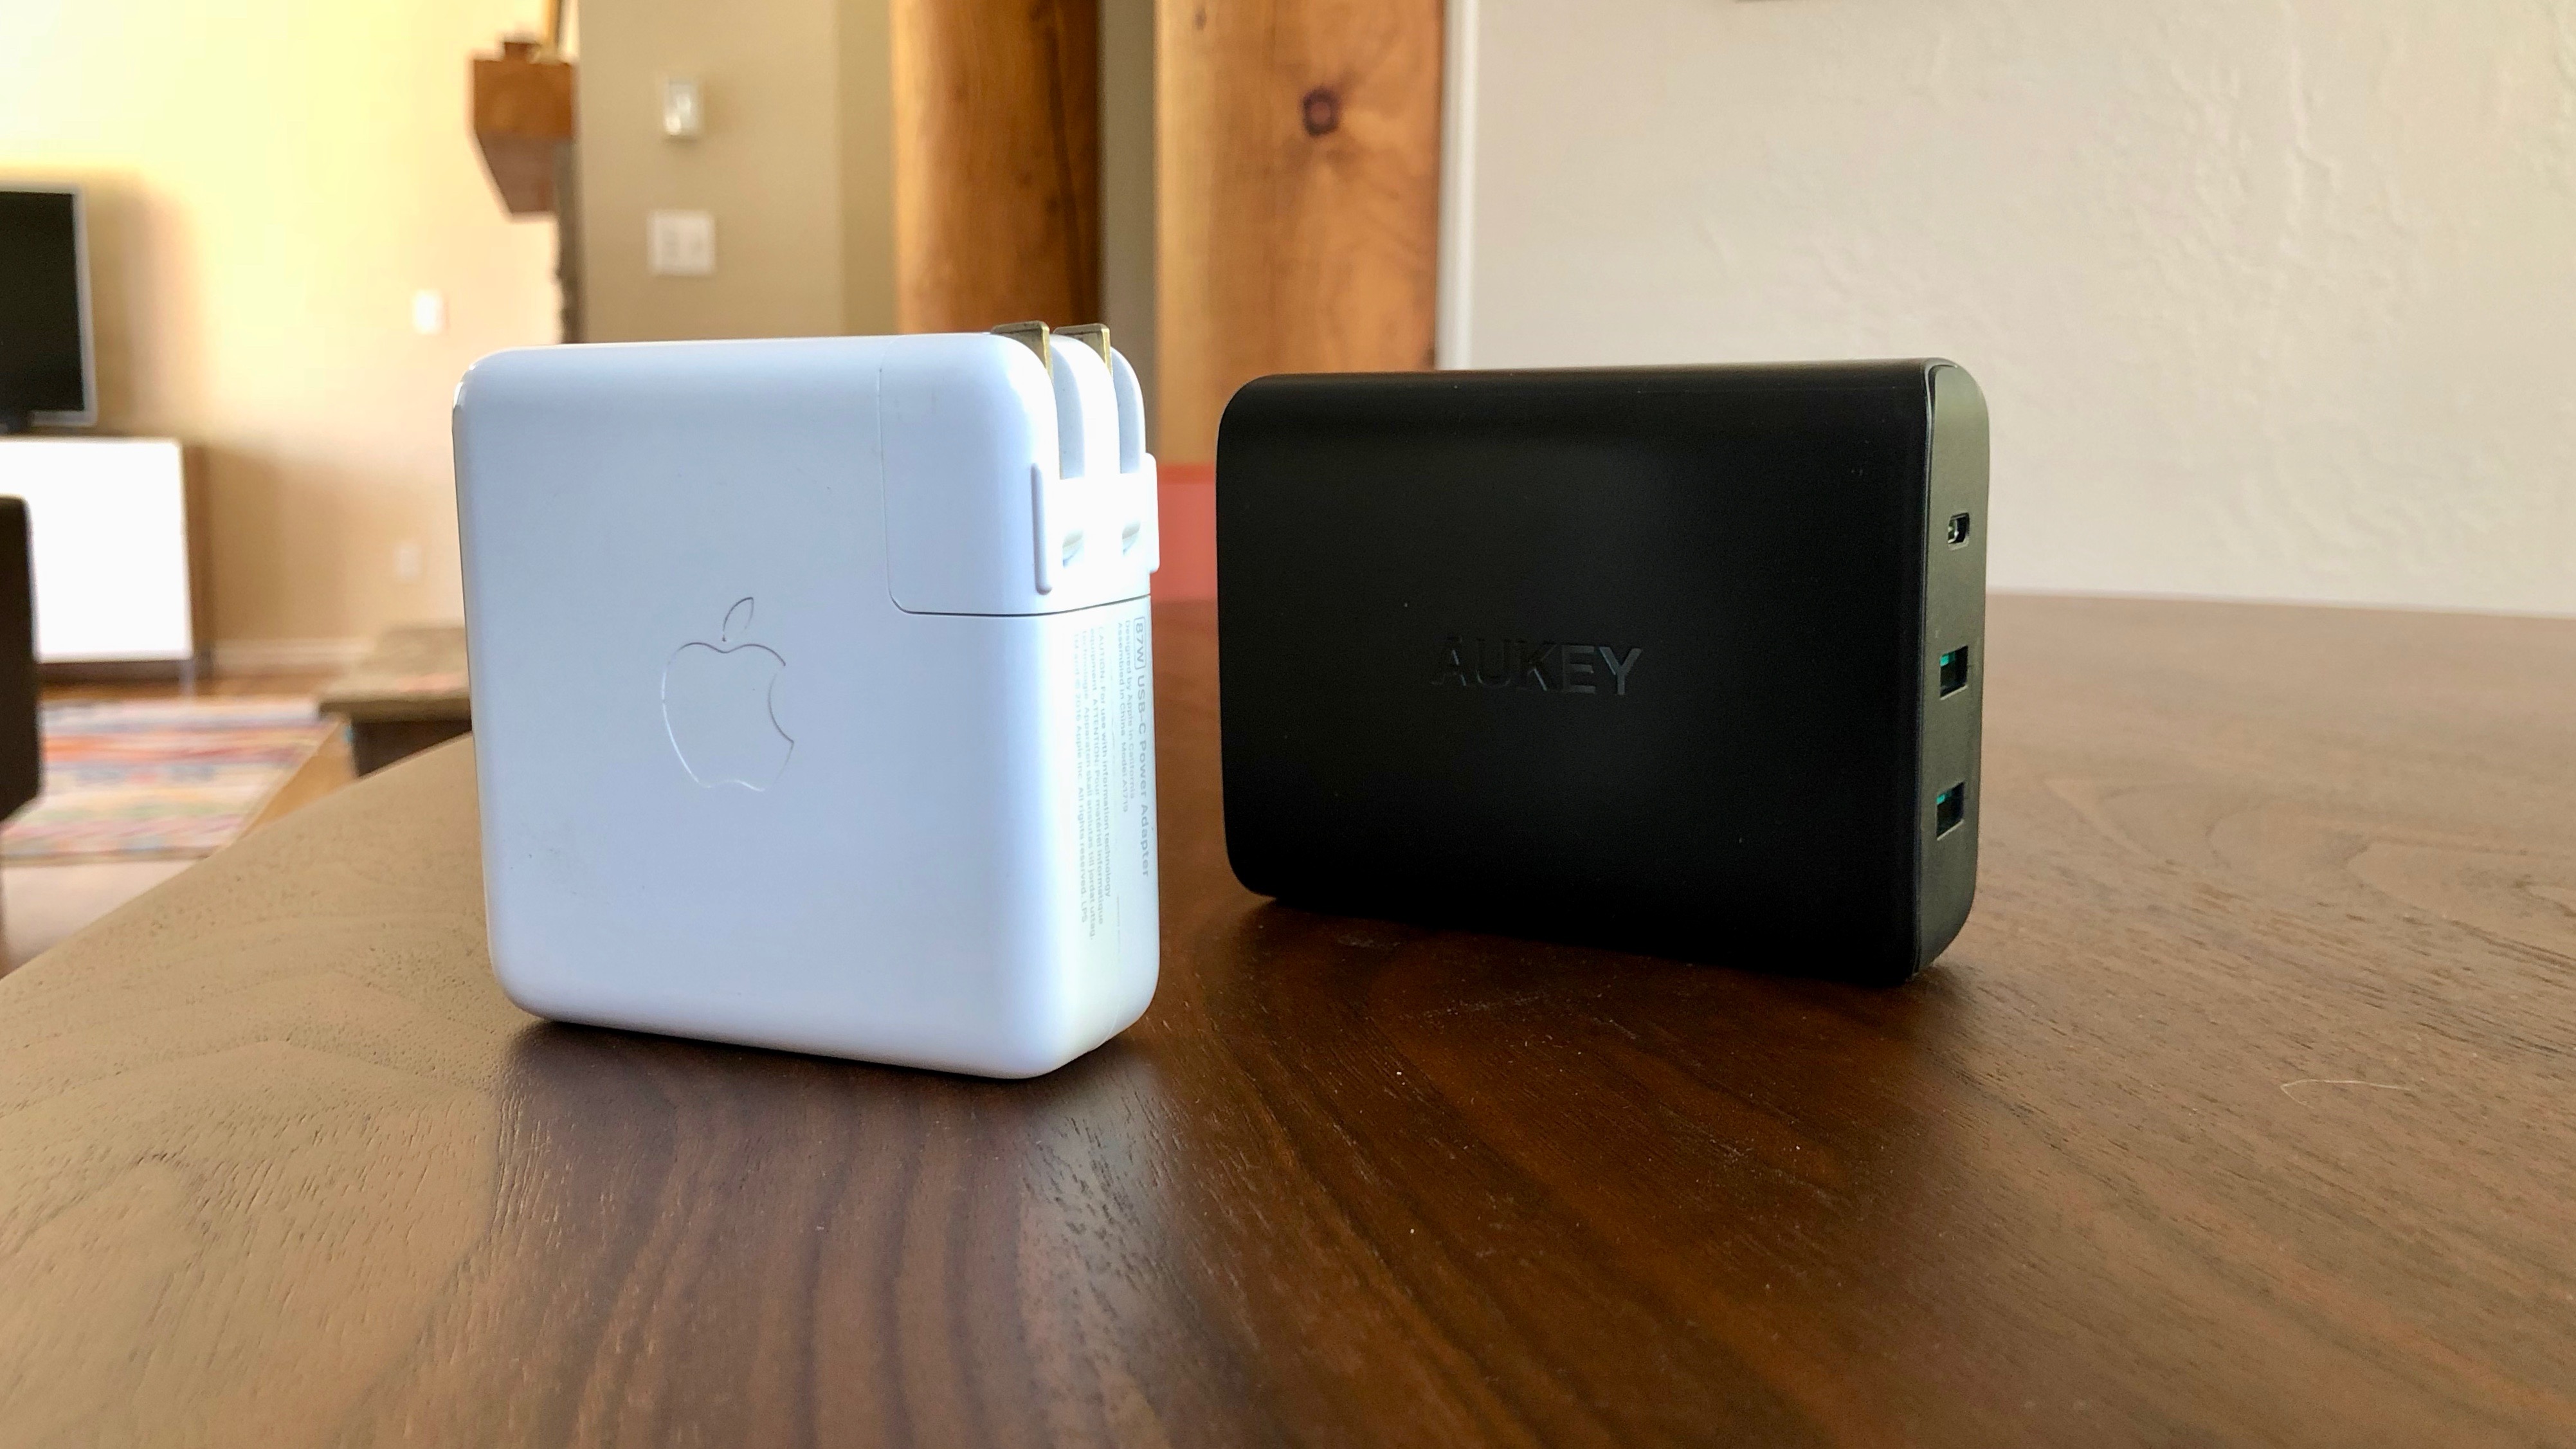 Hands-on: Is a 60W charger good enough for all MacBook Pro models? - 9to5Mac